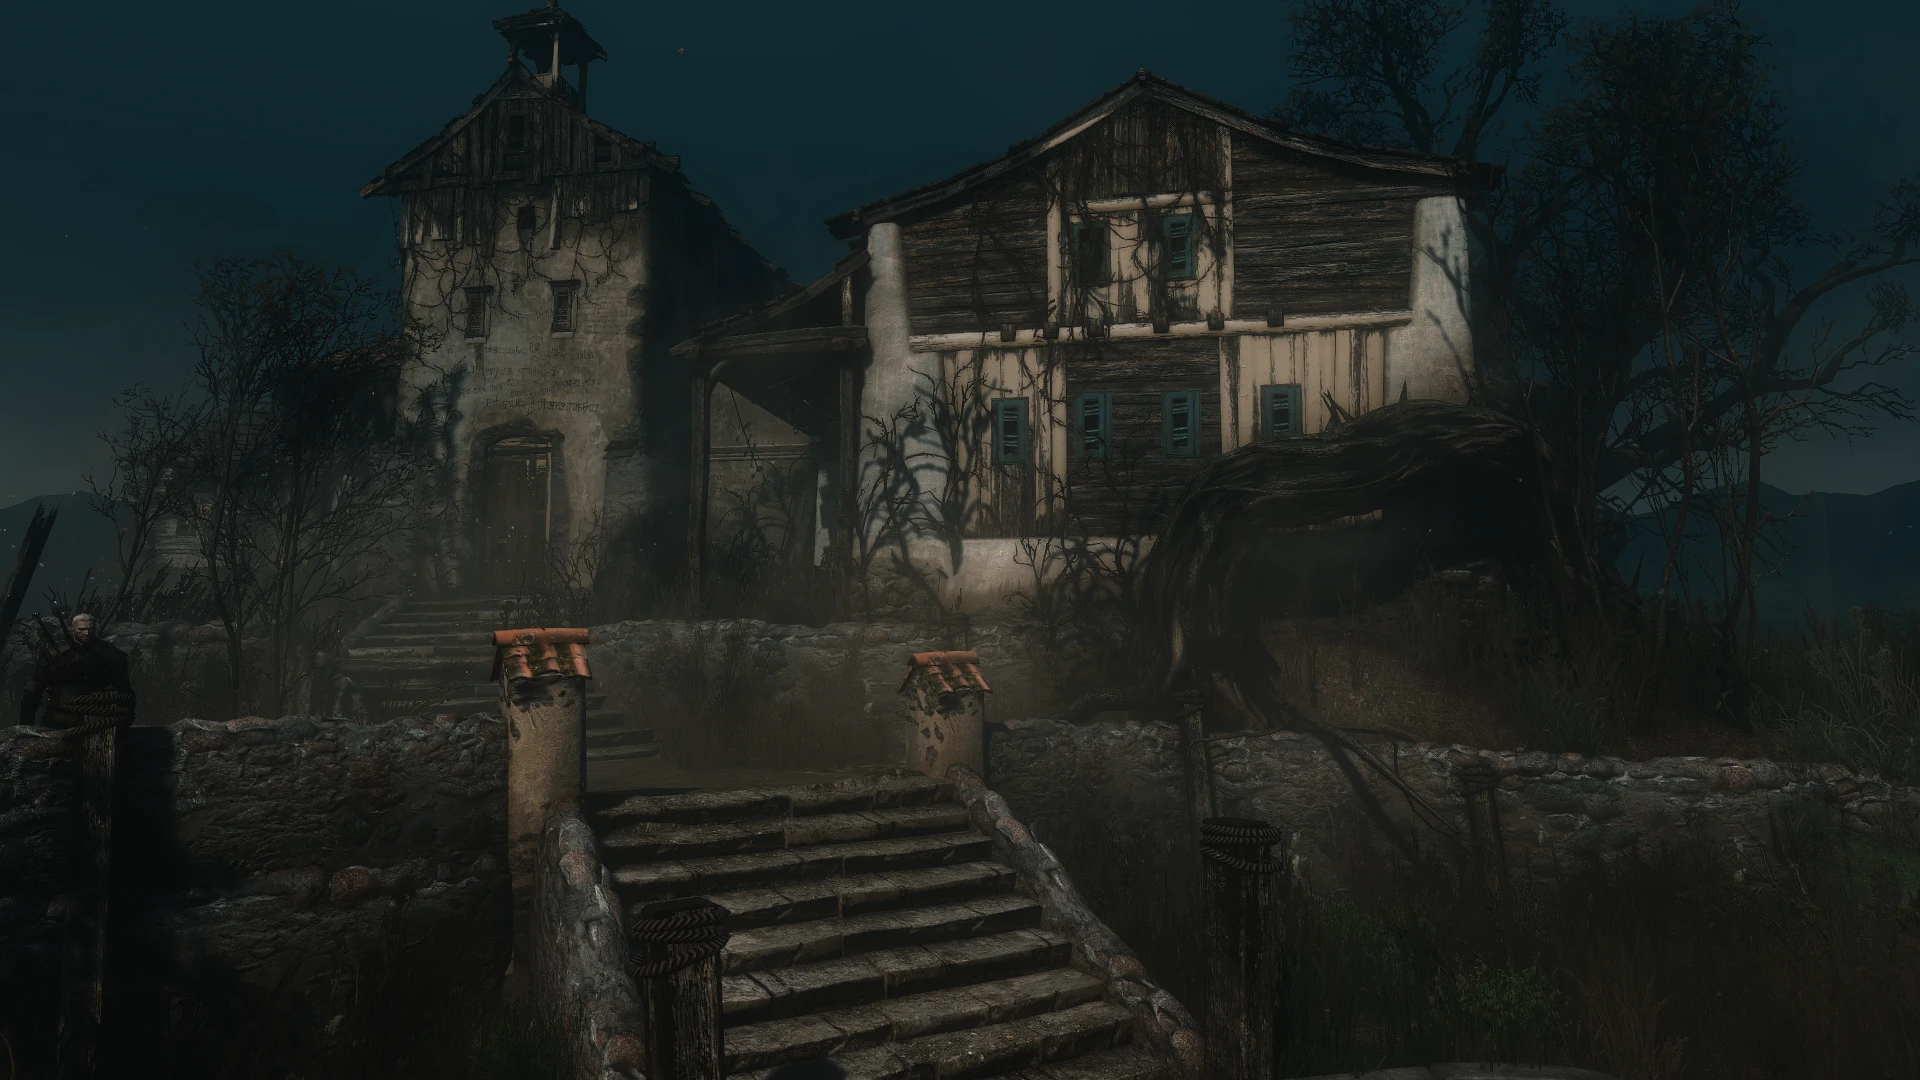 Spoon House At The Witcher 3 Nexus Mods And Community